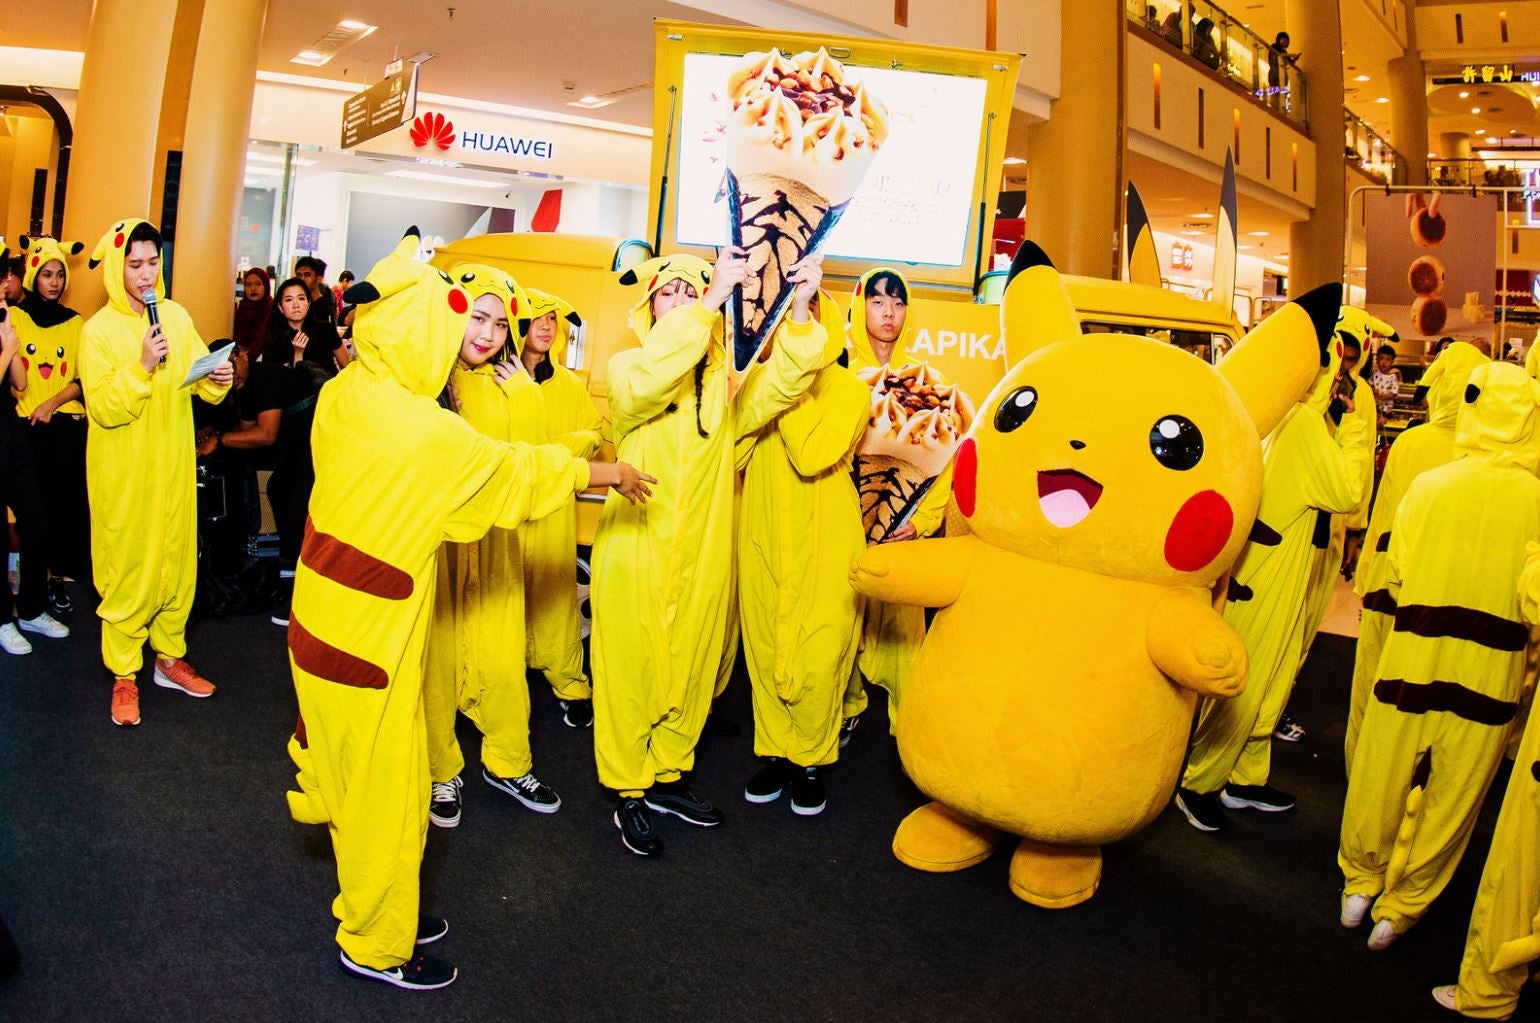 Omg Pikachu Is Coming To Sunway Pyramid This 3Rd &Amp; 4Th August, Here's Why You Gotta Check It Out! - World Of Buzz 4